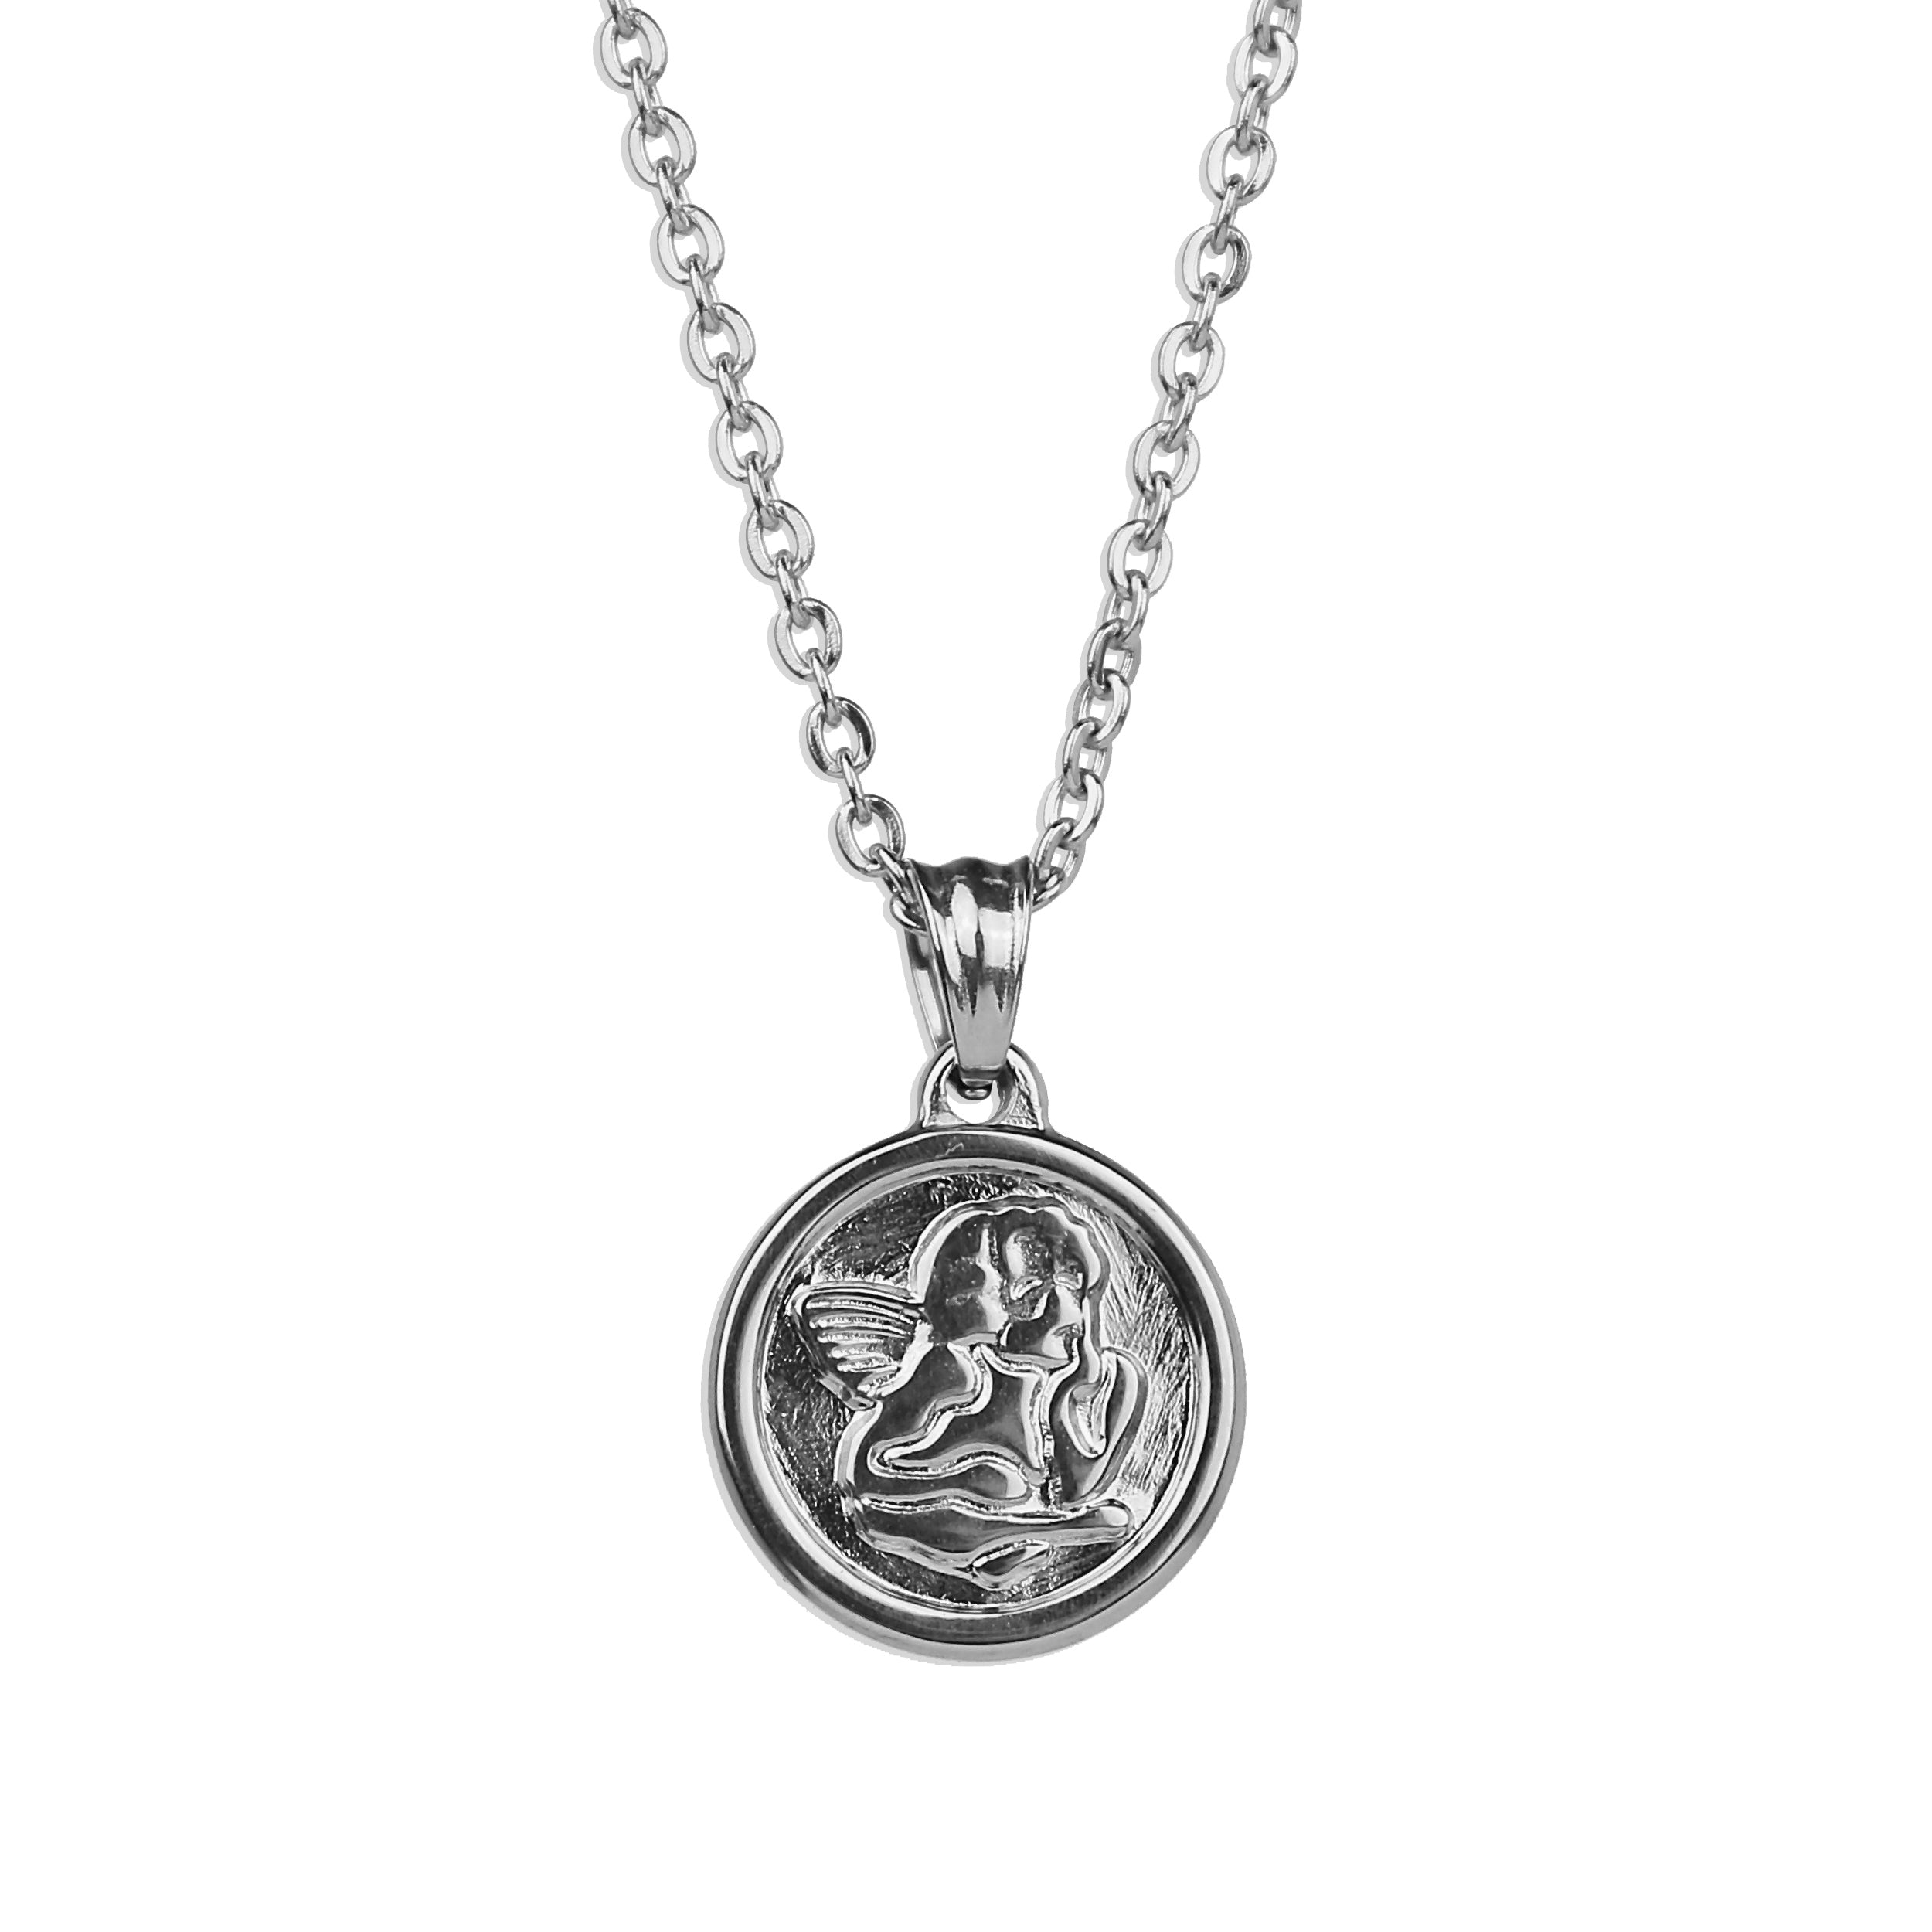 Small Guardian Angel Necklace - Silver